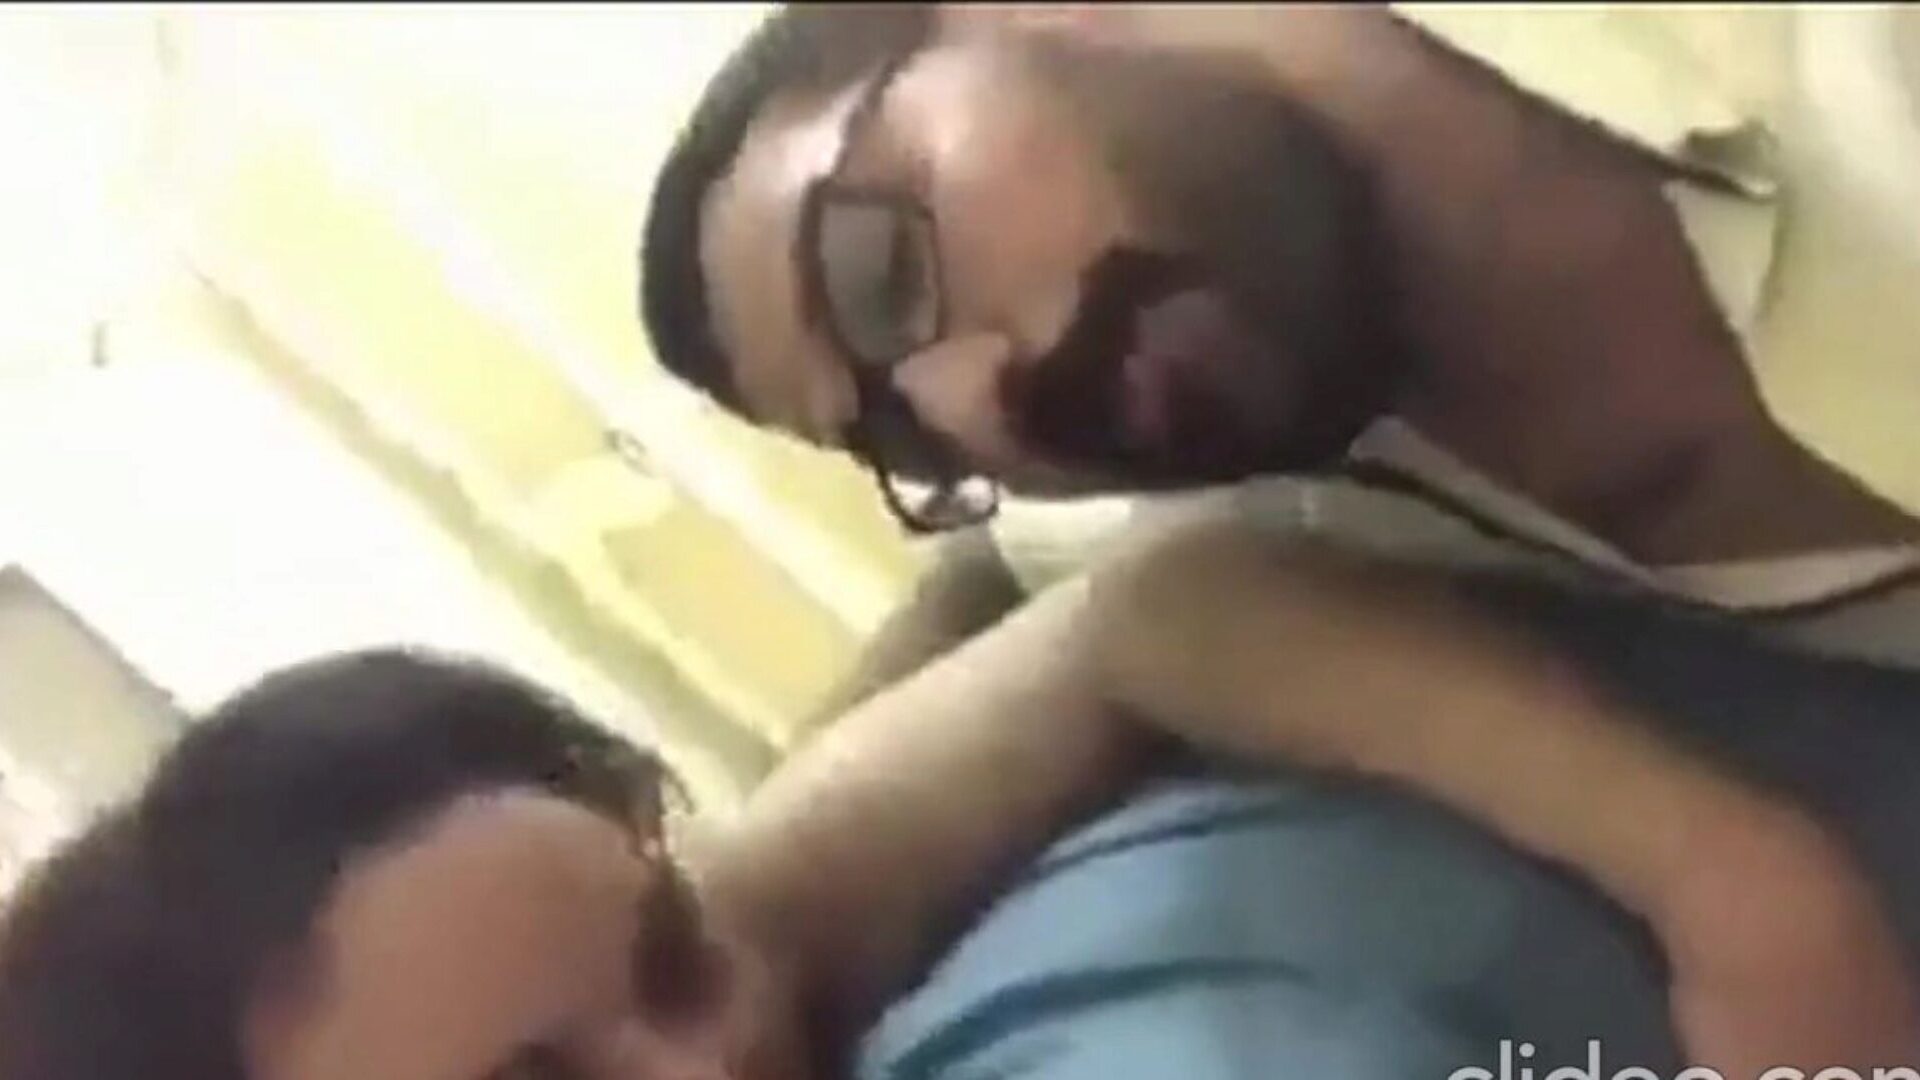 EGYPTIAN BITCH GETTING FUCKED IN FRONT OF HER FRIEND